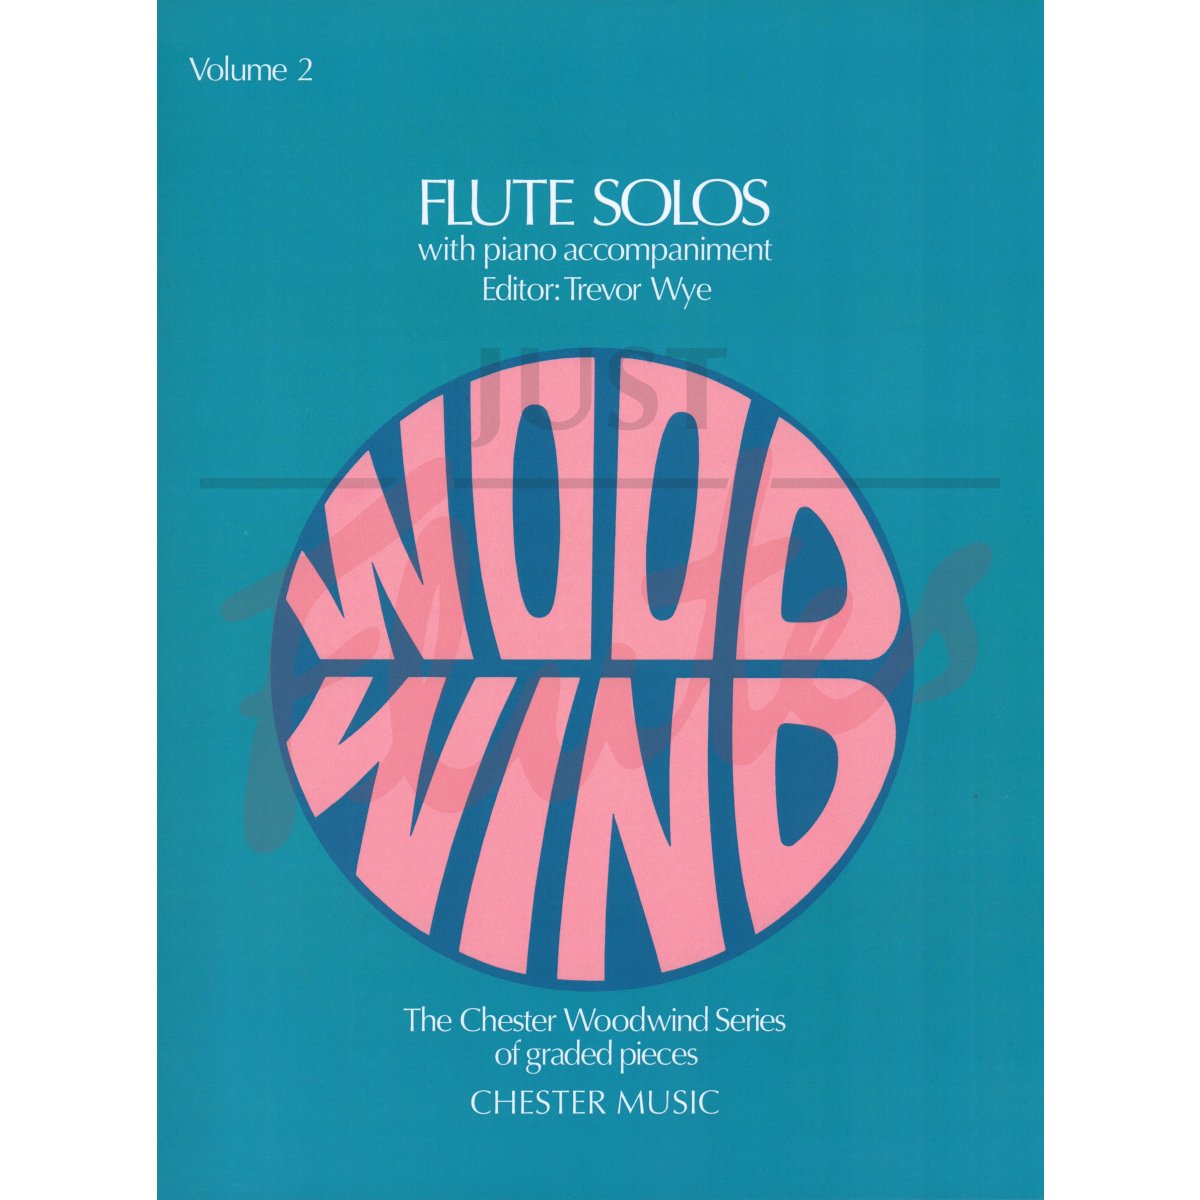 Flute Solos Vol 2 for Flute and Piano